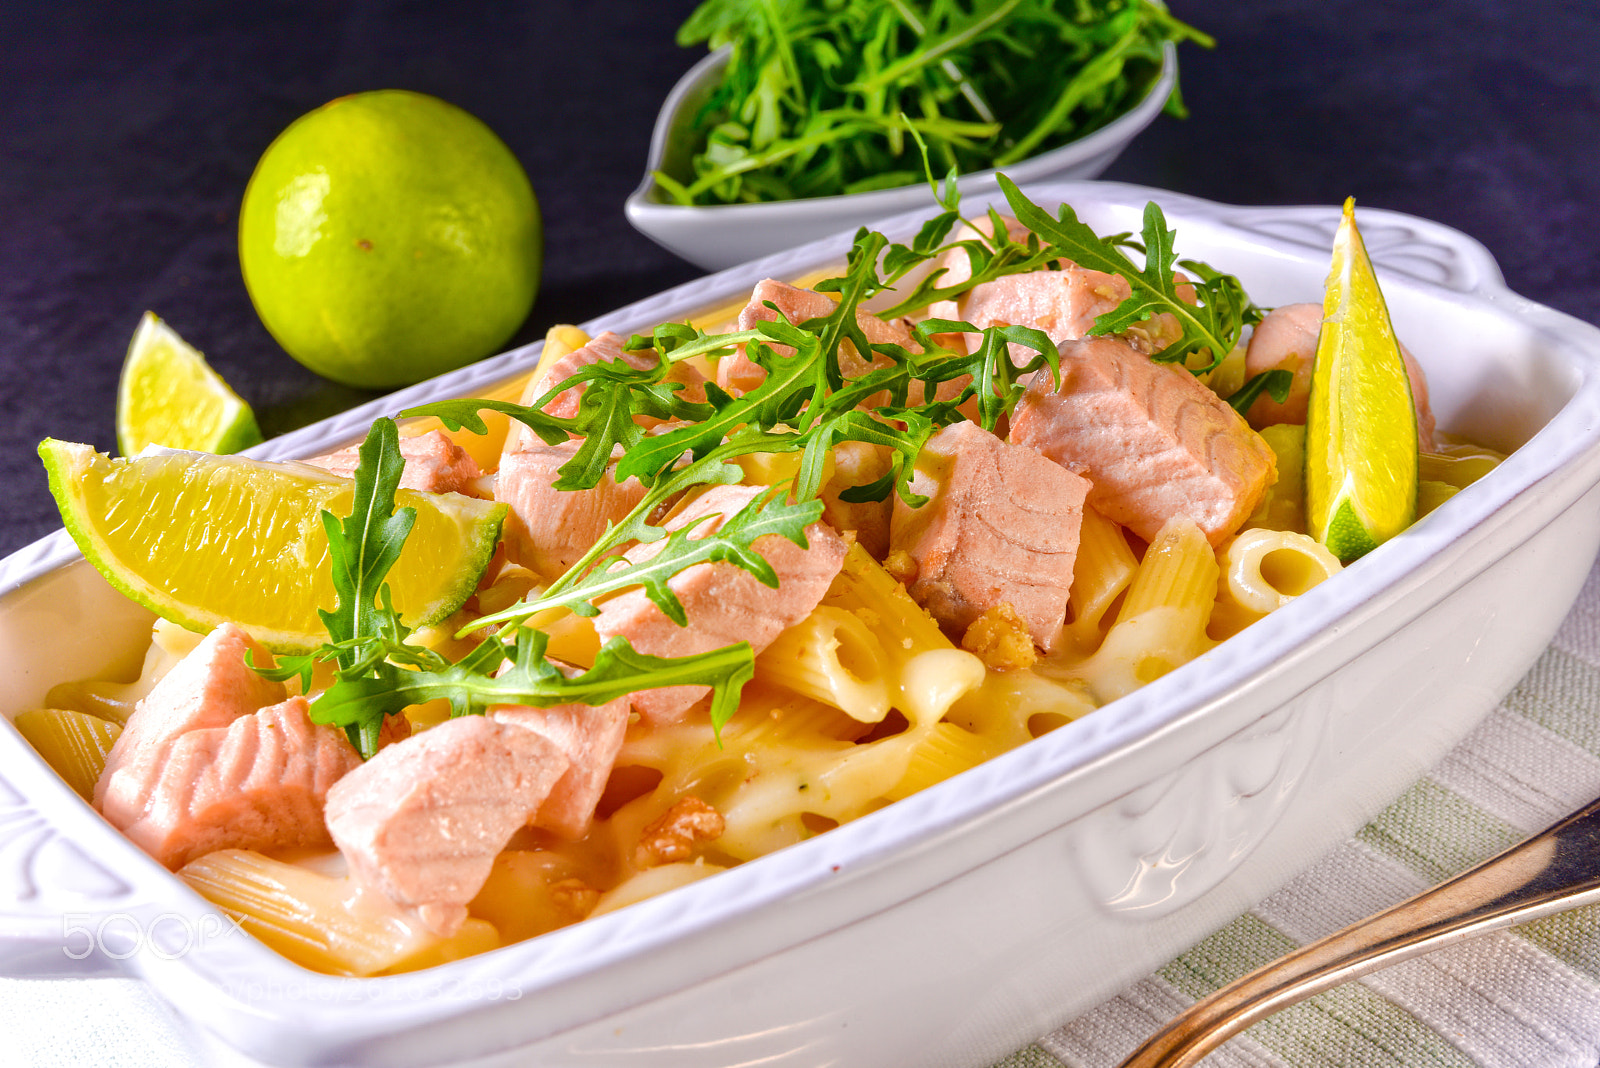 Nikon D810 sample photo. Salmon with penne noodle photography